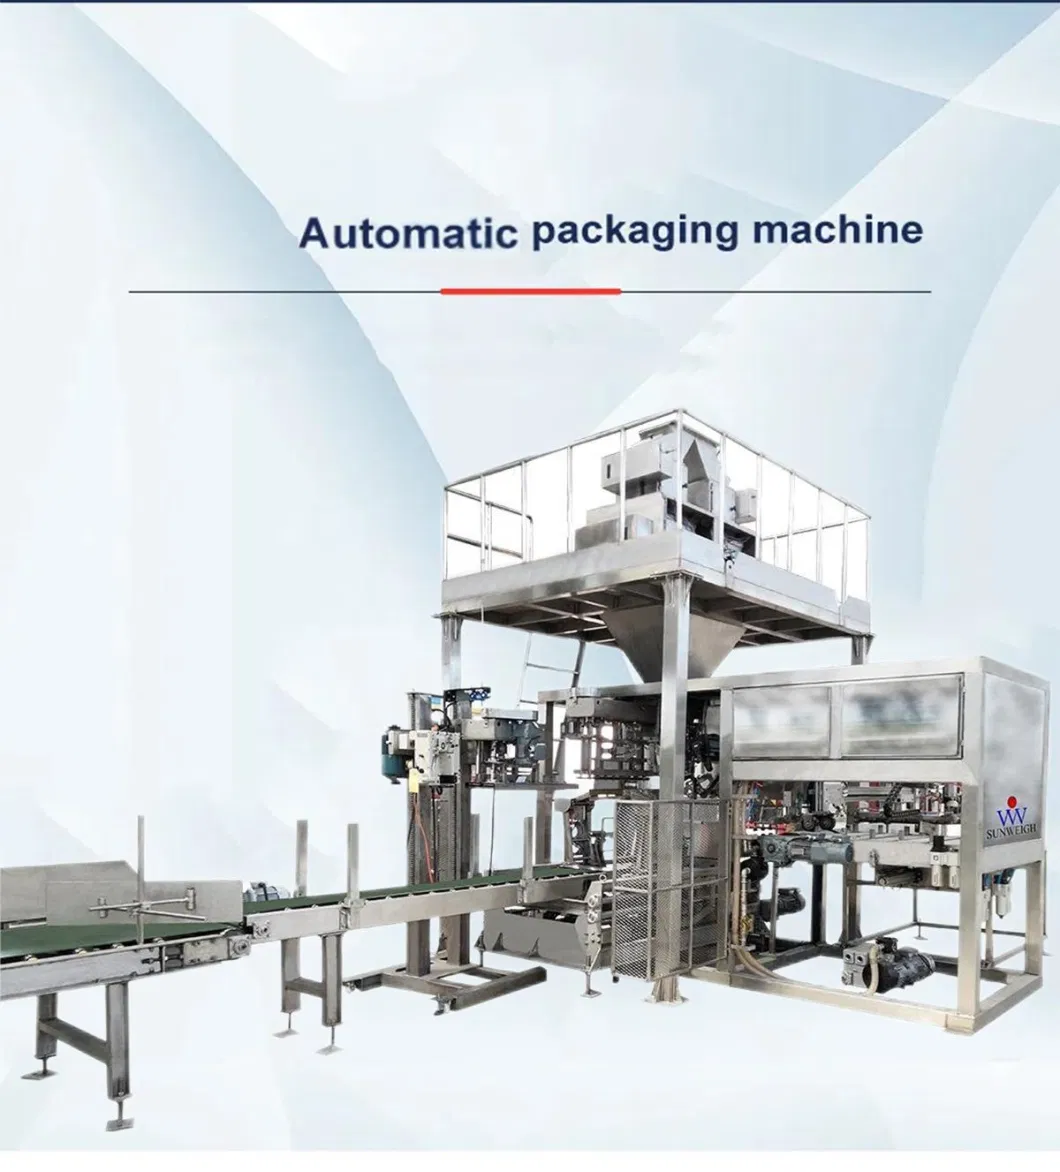 Fully Automatic Bag-Feeding Type Packaging Machine Adopt Advanced PLC Detection Device